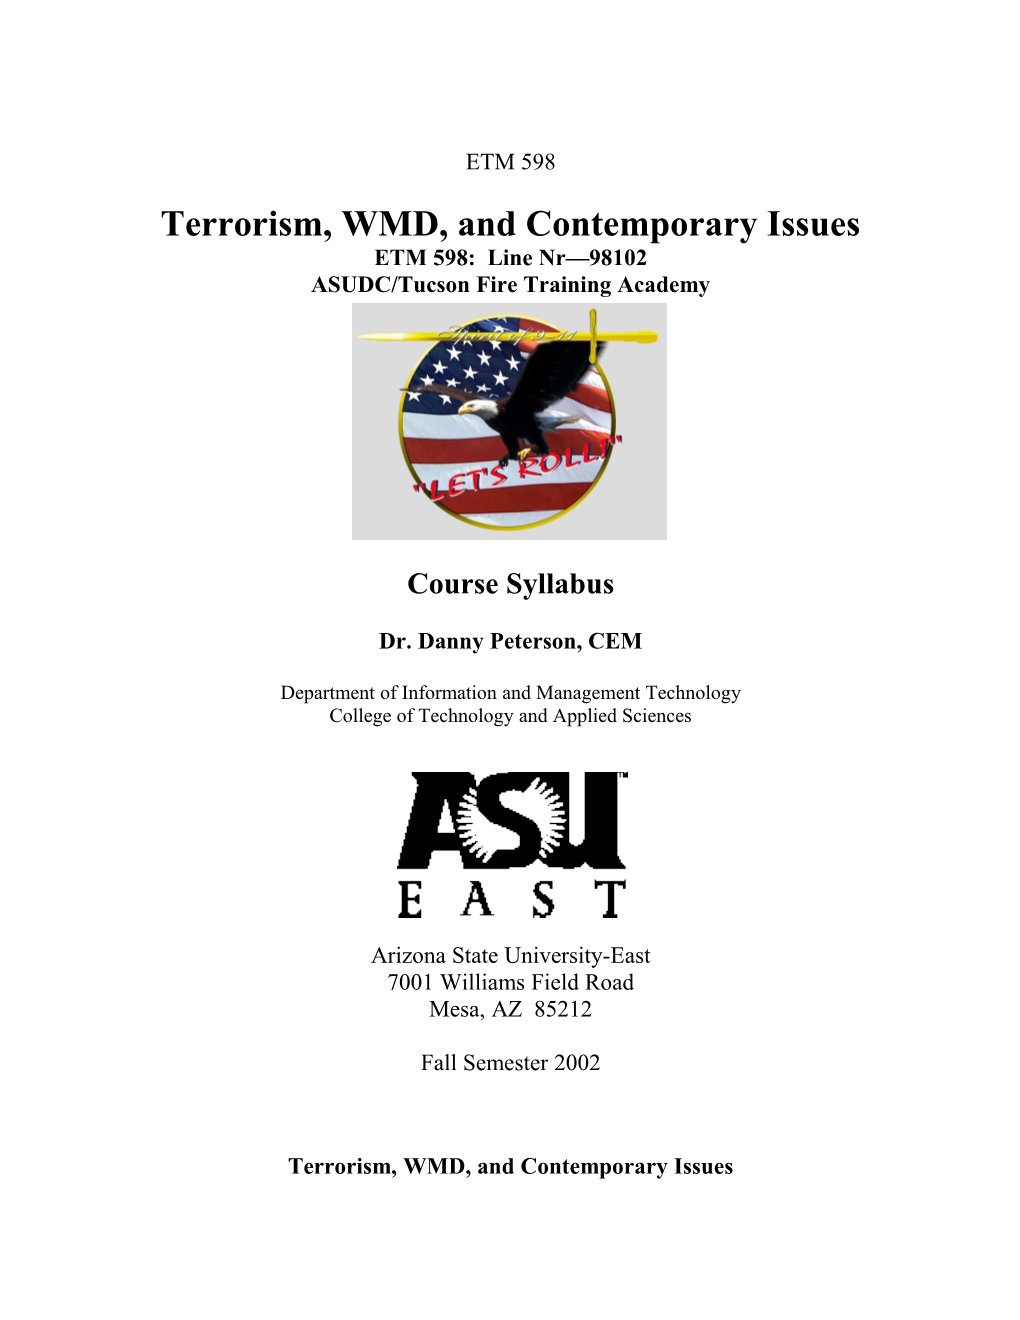 Terrorism, WMD, and Contemporary Issues